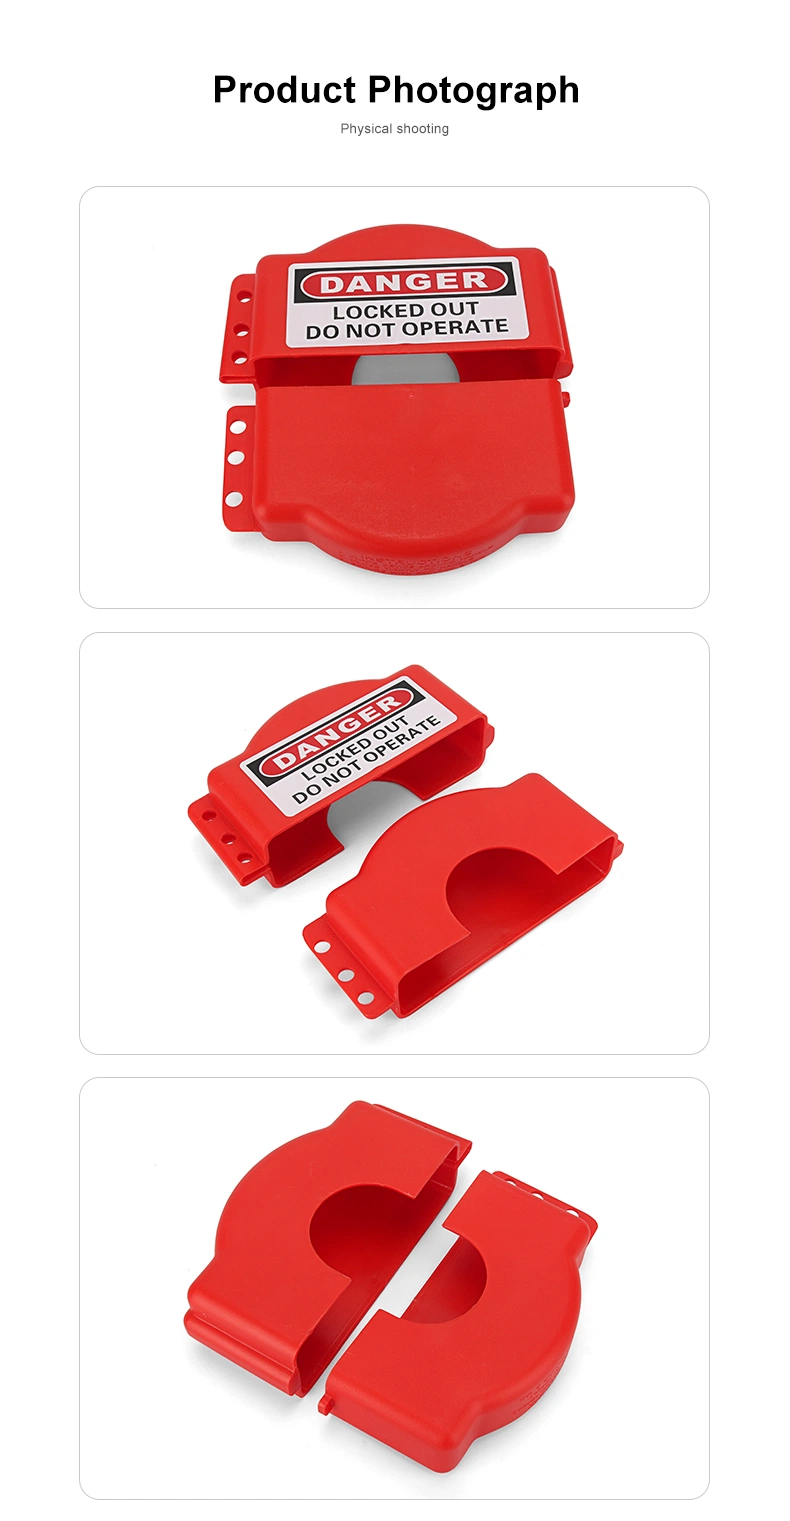 Adjustable PP Gate Valve Lockout with Tagout